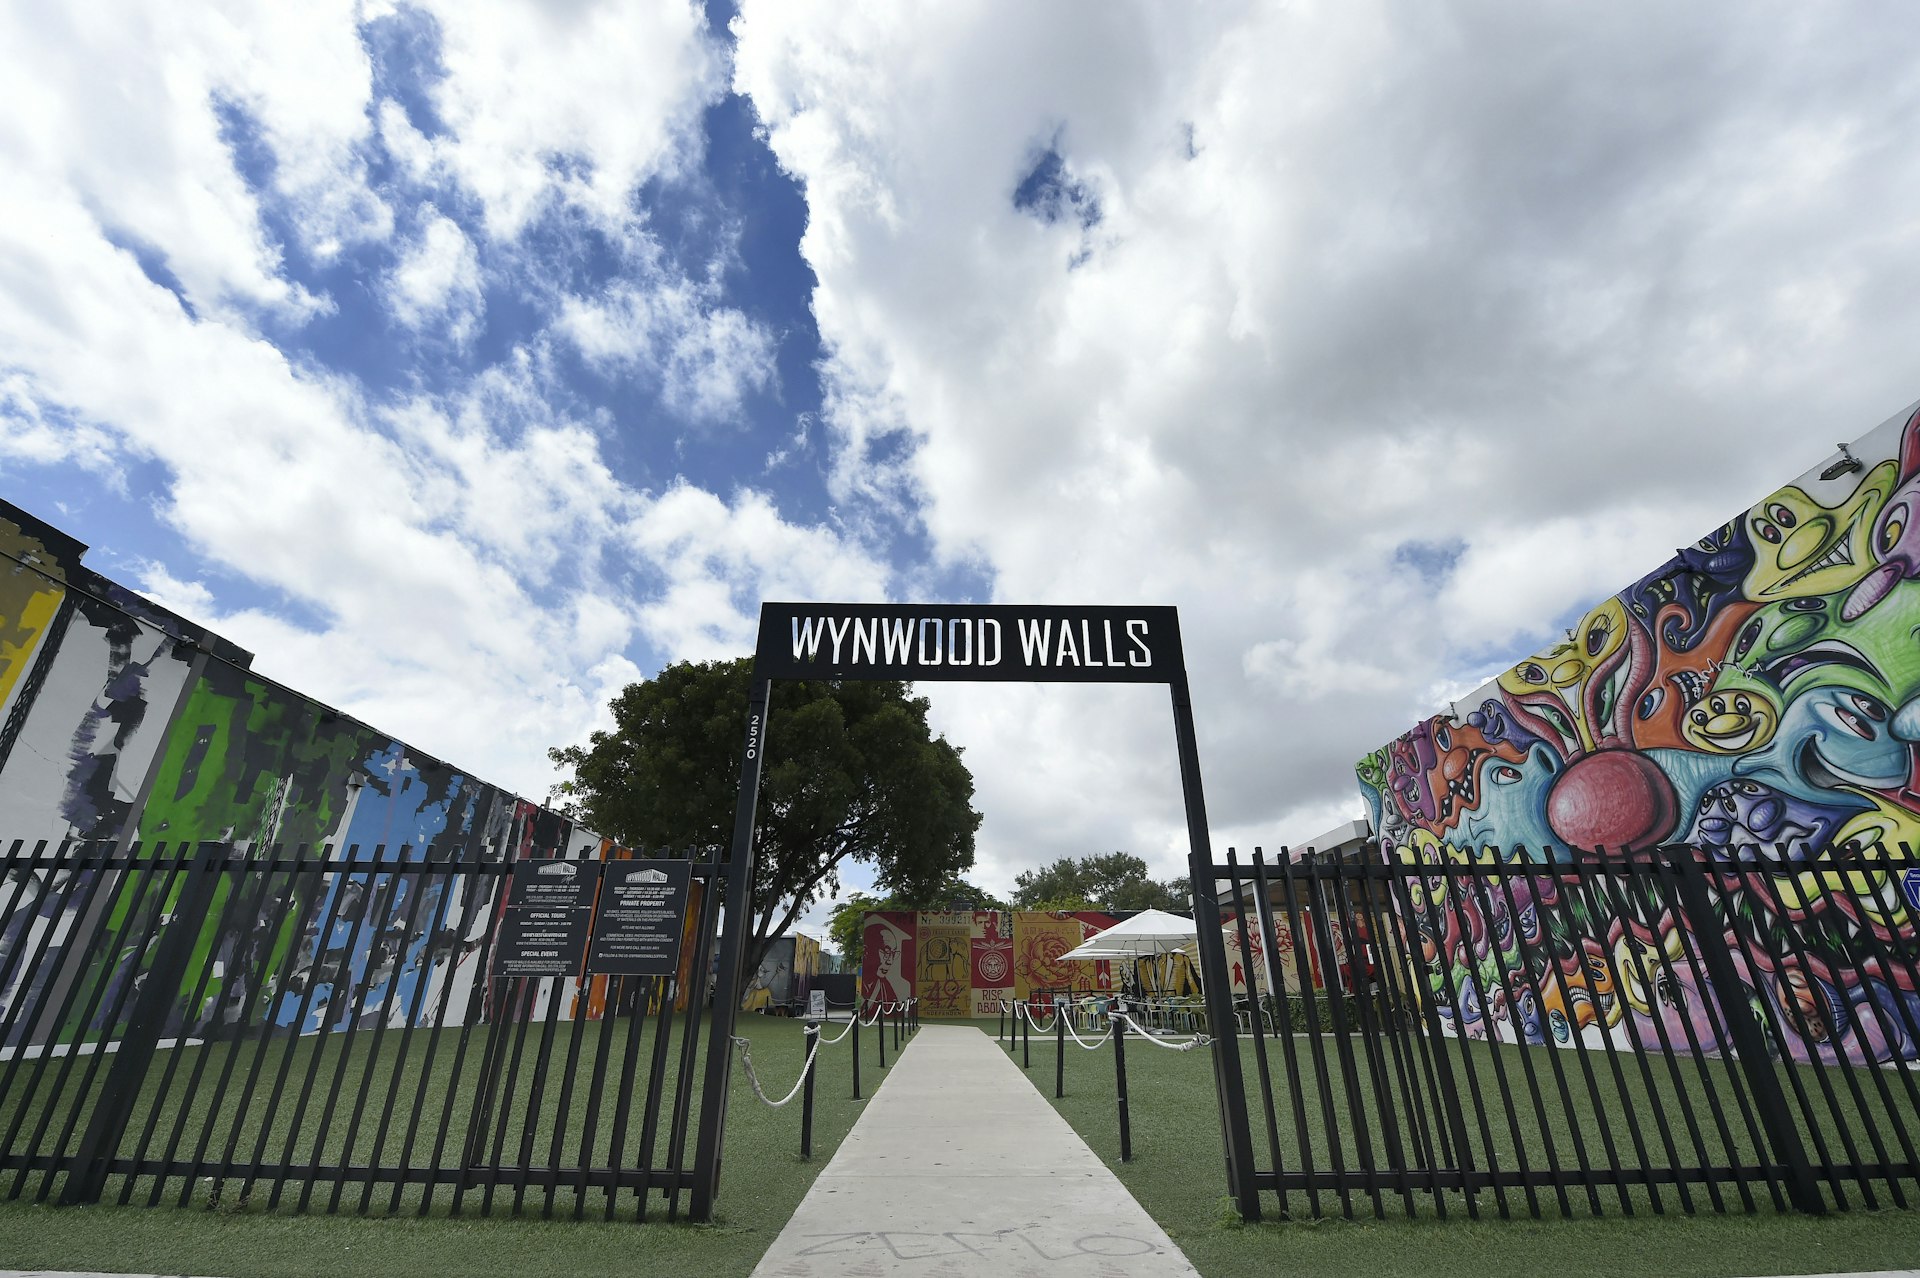 Clouds cover the entrance to the Wynwood Walls section of the Wynwood neighborhood in Miami